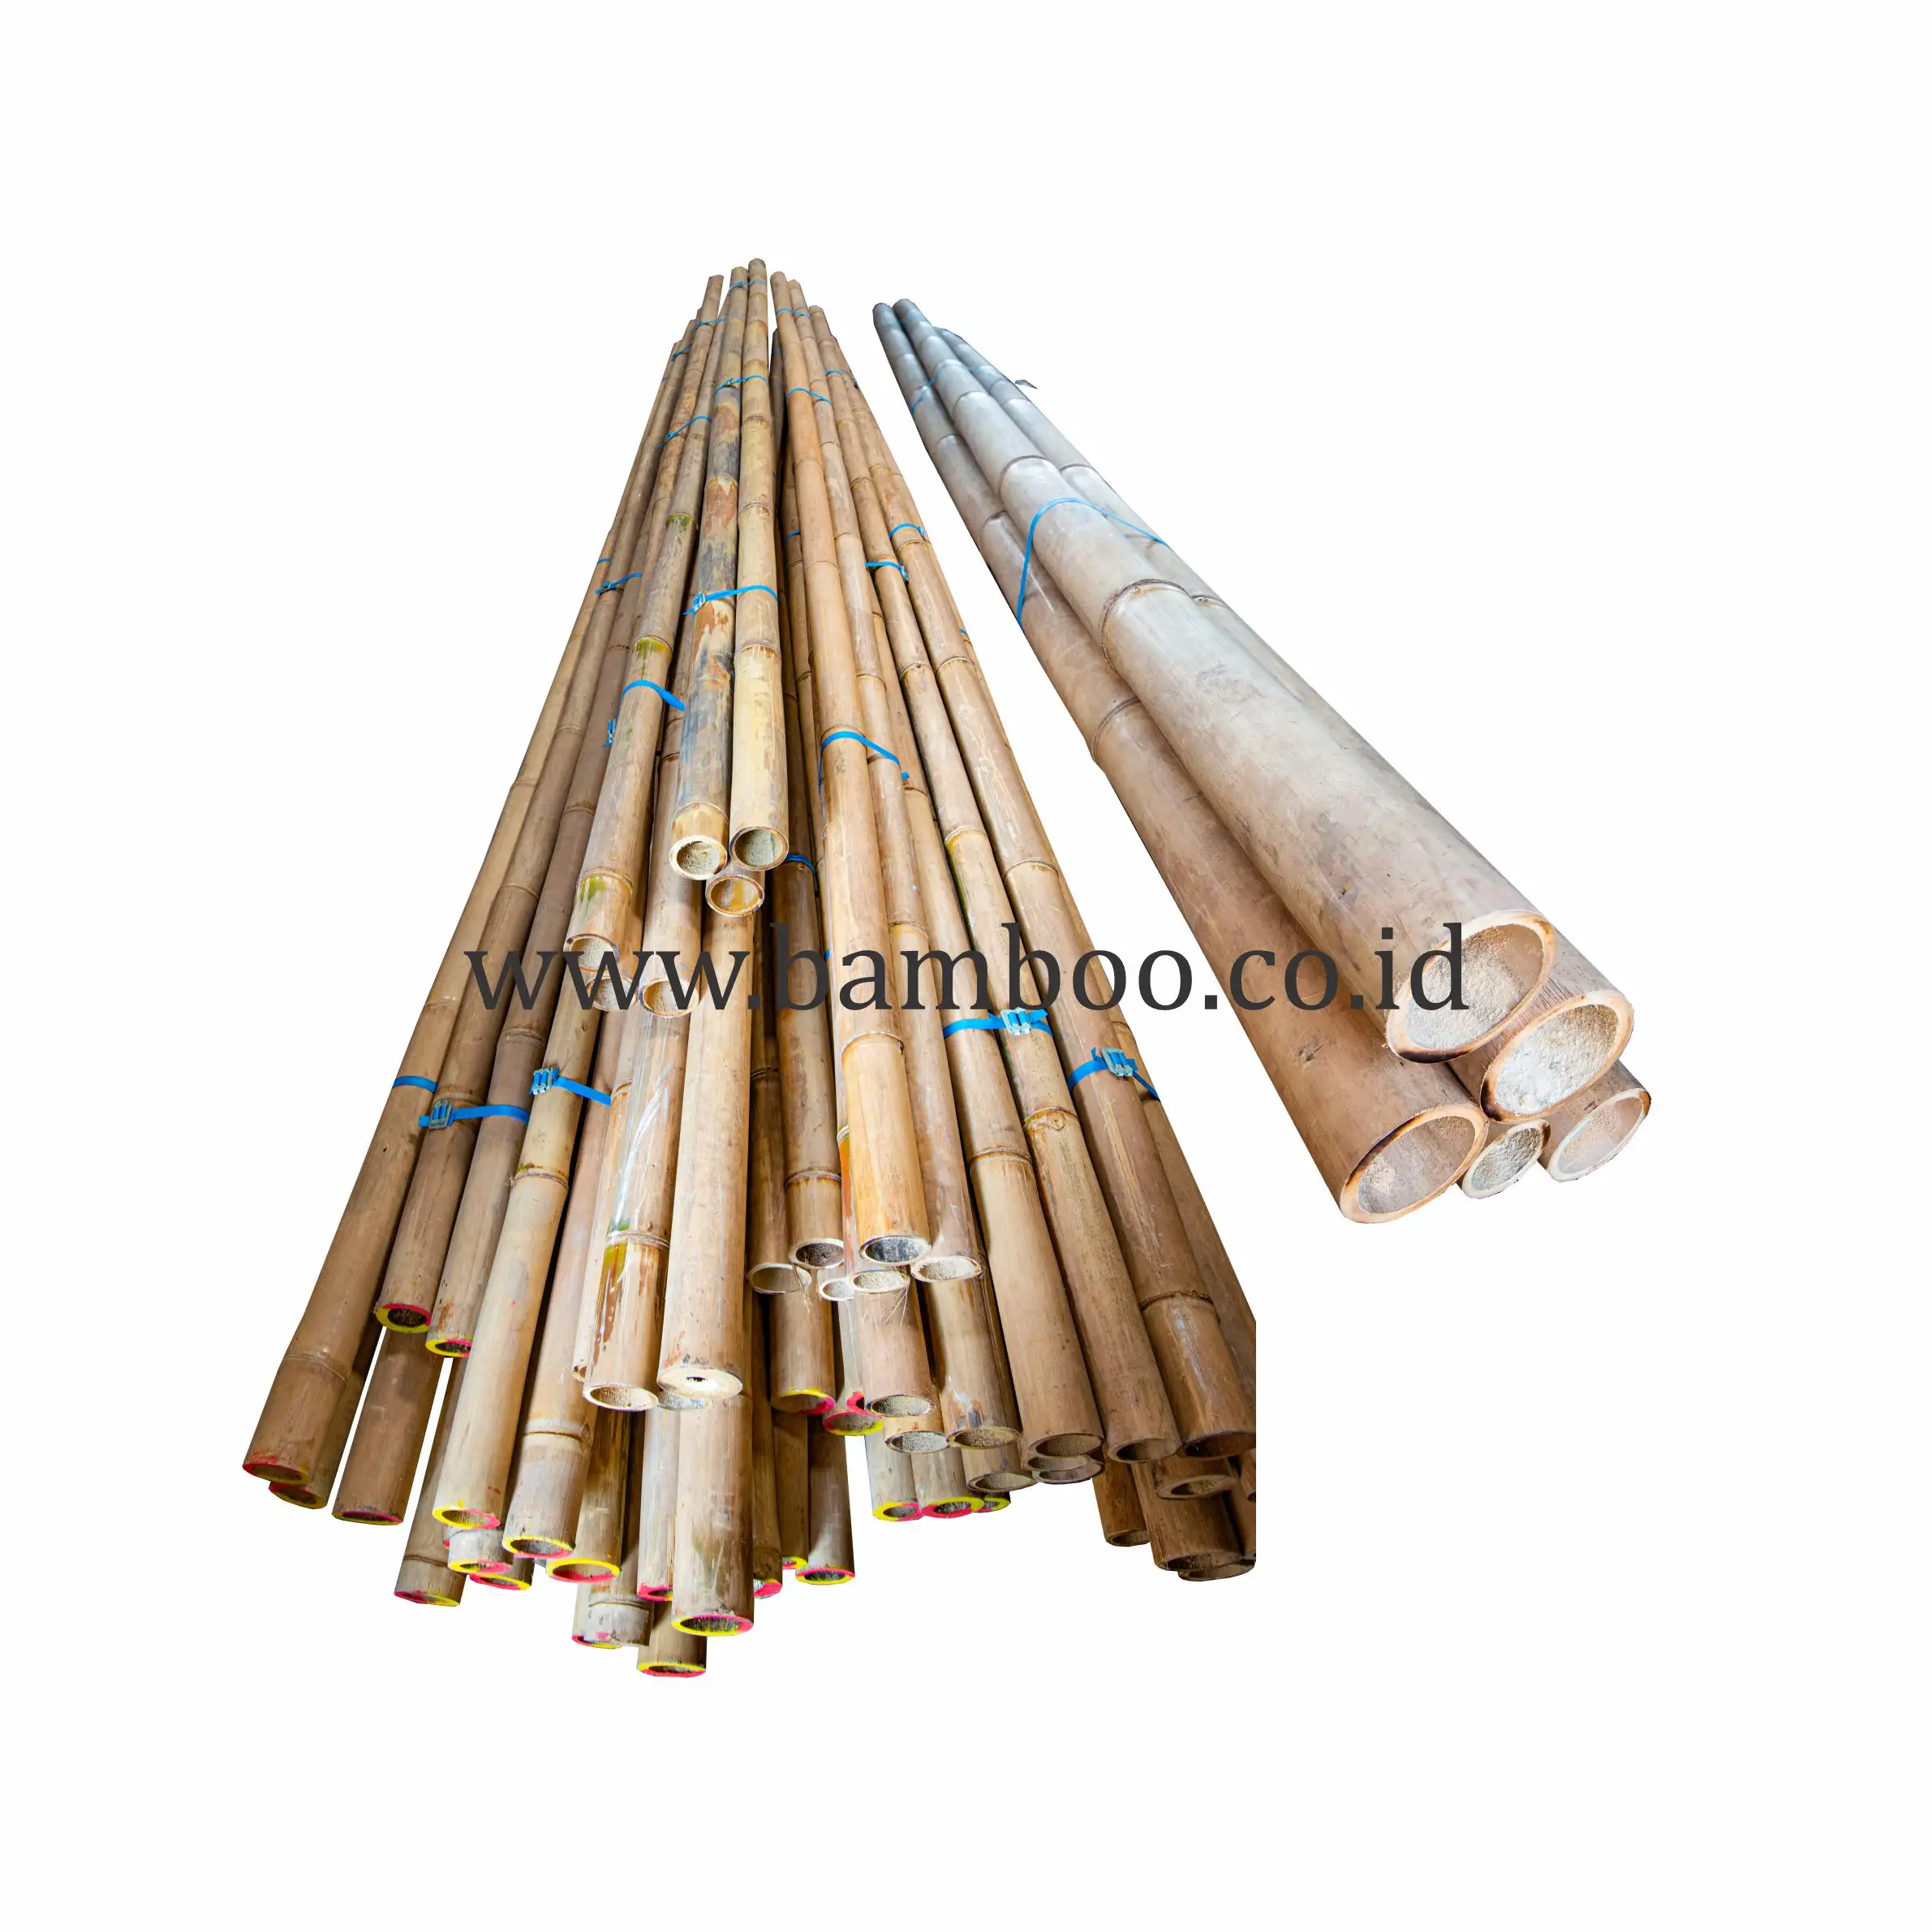 Bamboo Poles for Construction and Home Decor - Natural 2 - 4 Meter Natural Color Dia 3 - 10 Meter 100 Bamboo Raw Material